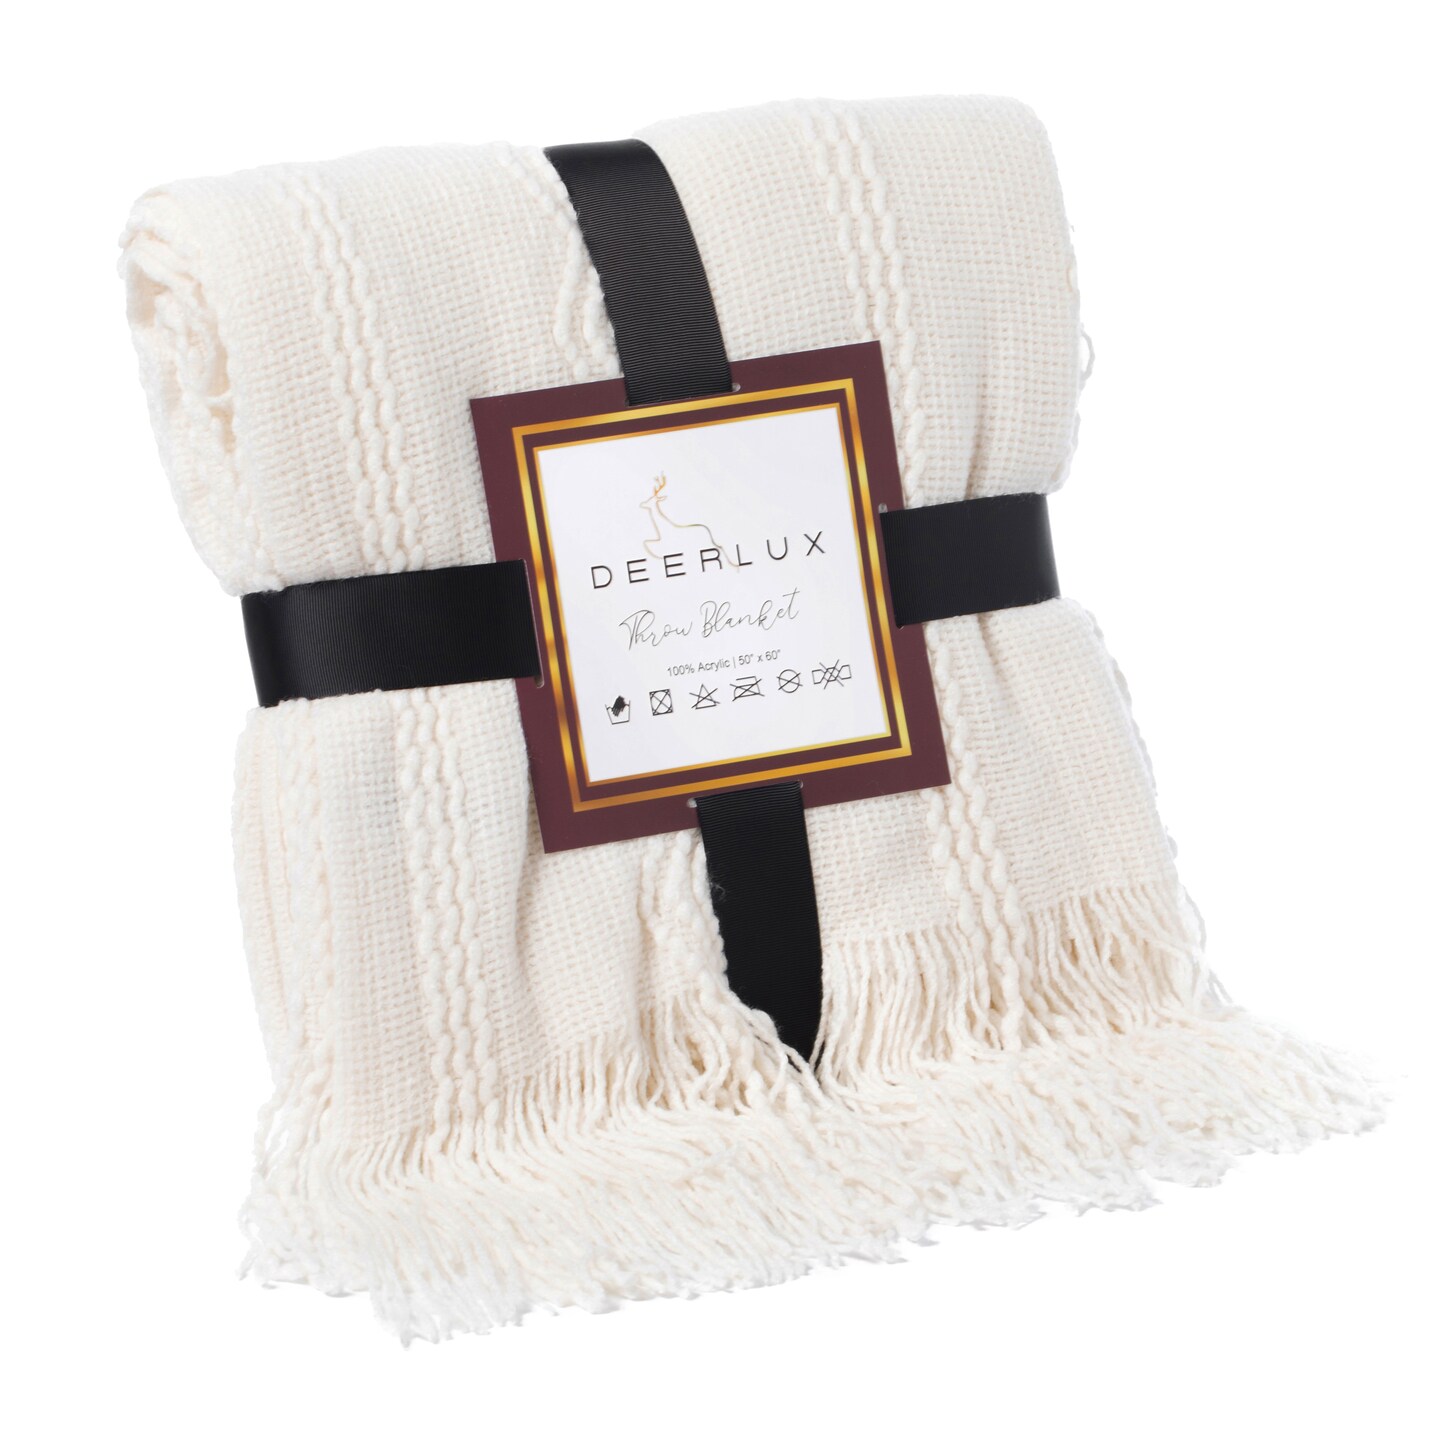 Decorative Throw Blanket - 50x60in Soft Knit with Delightful Fringe Edges for a Sophisticated and Cozy Touch to Your Living Space Lightweight, Breathable, Easy Care, Versatile, All-Season, Ideal for Lounging, Gifting